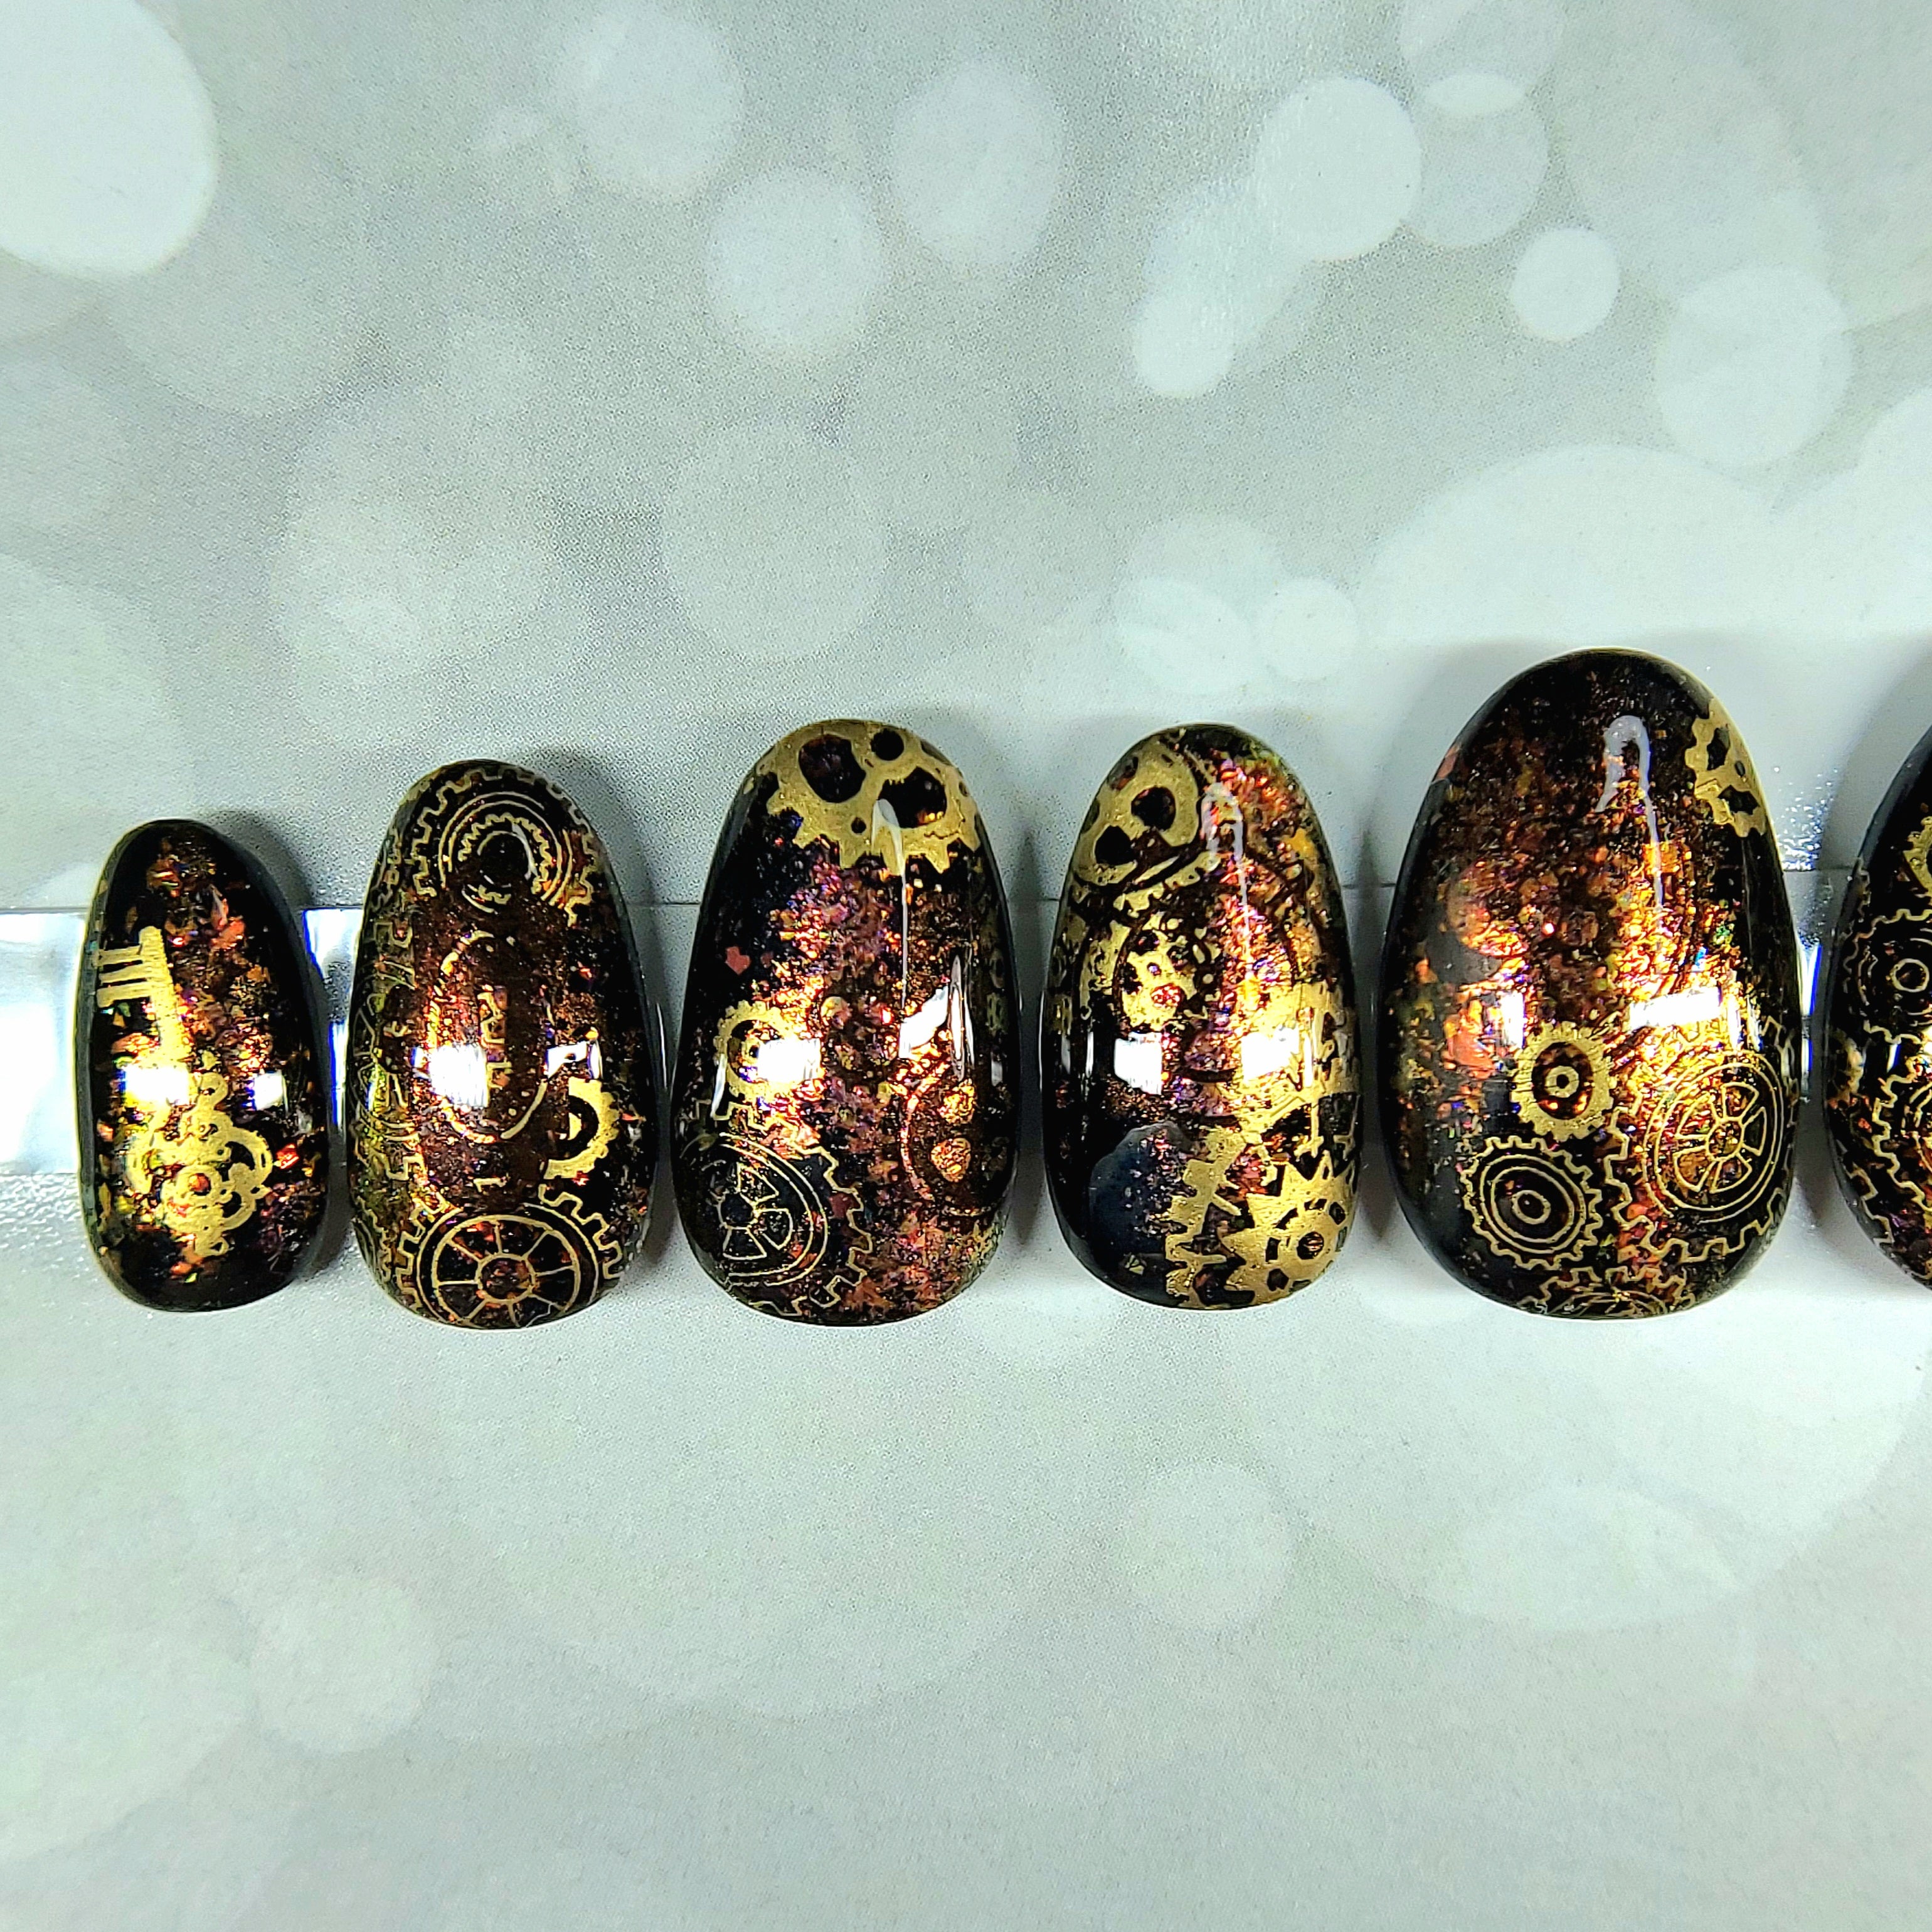 Stylish black nail art designs to keep your style on track : Black, Gold &  Nude Nails